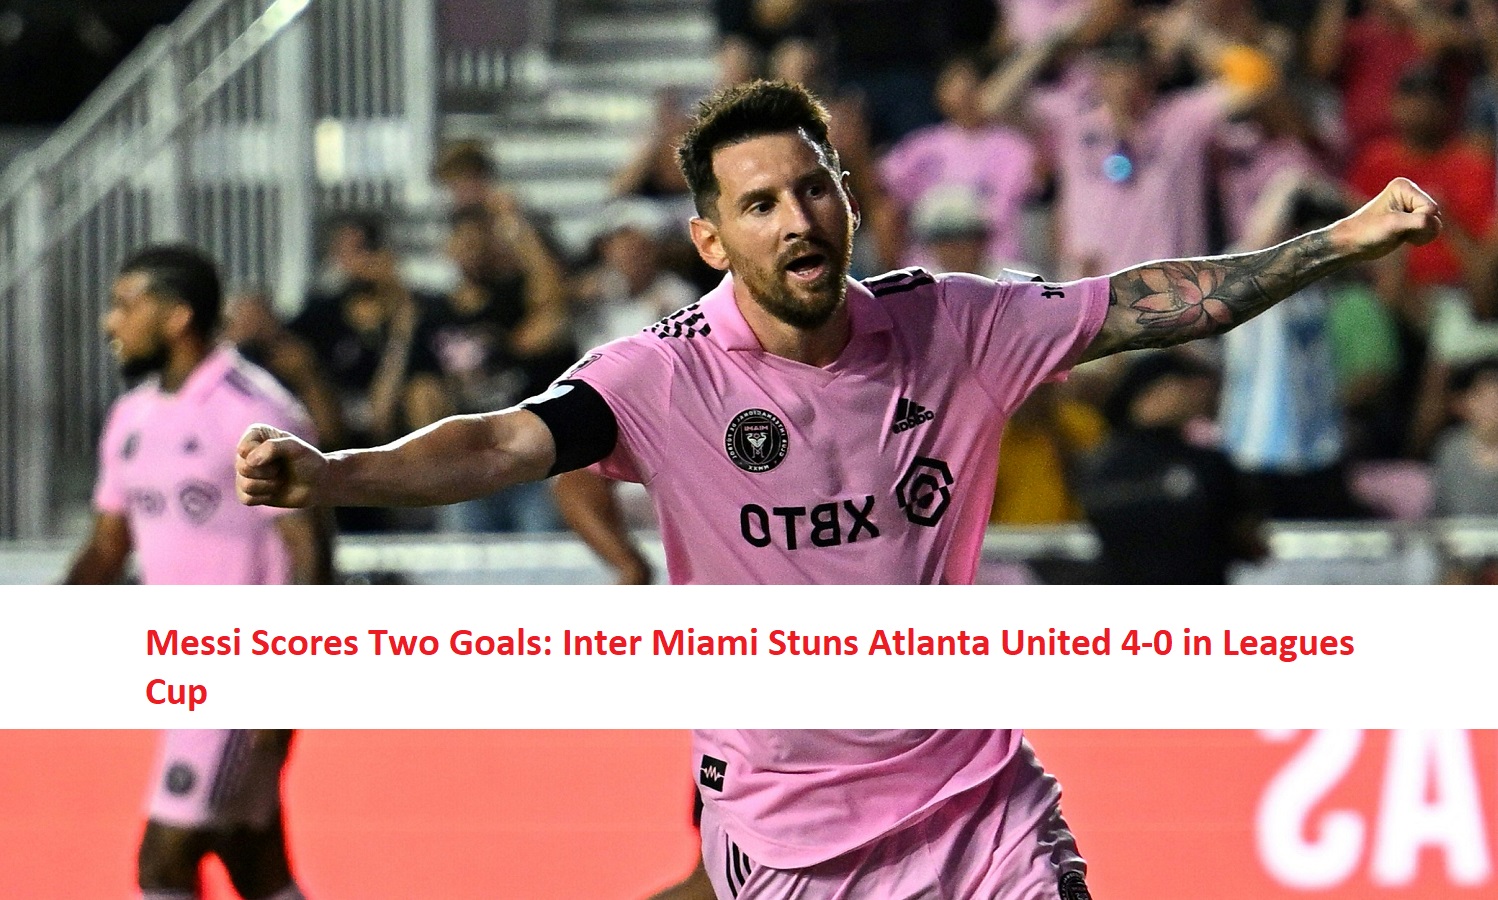 Messi Scores Two Goals: Inter Miami Stuns Atlanta United 4-0 in Leagues Cup